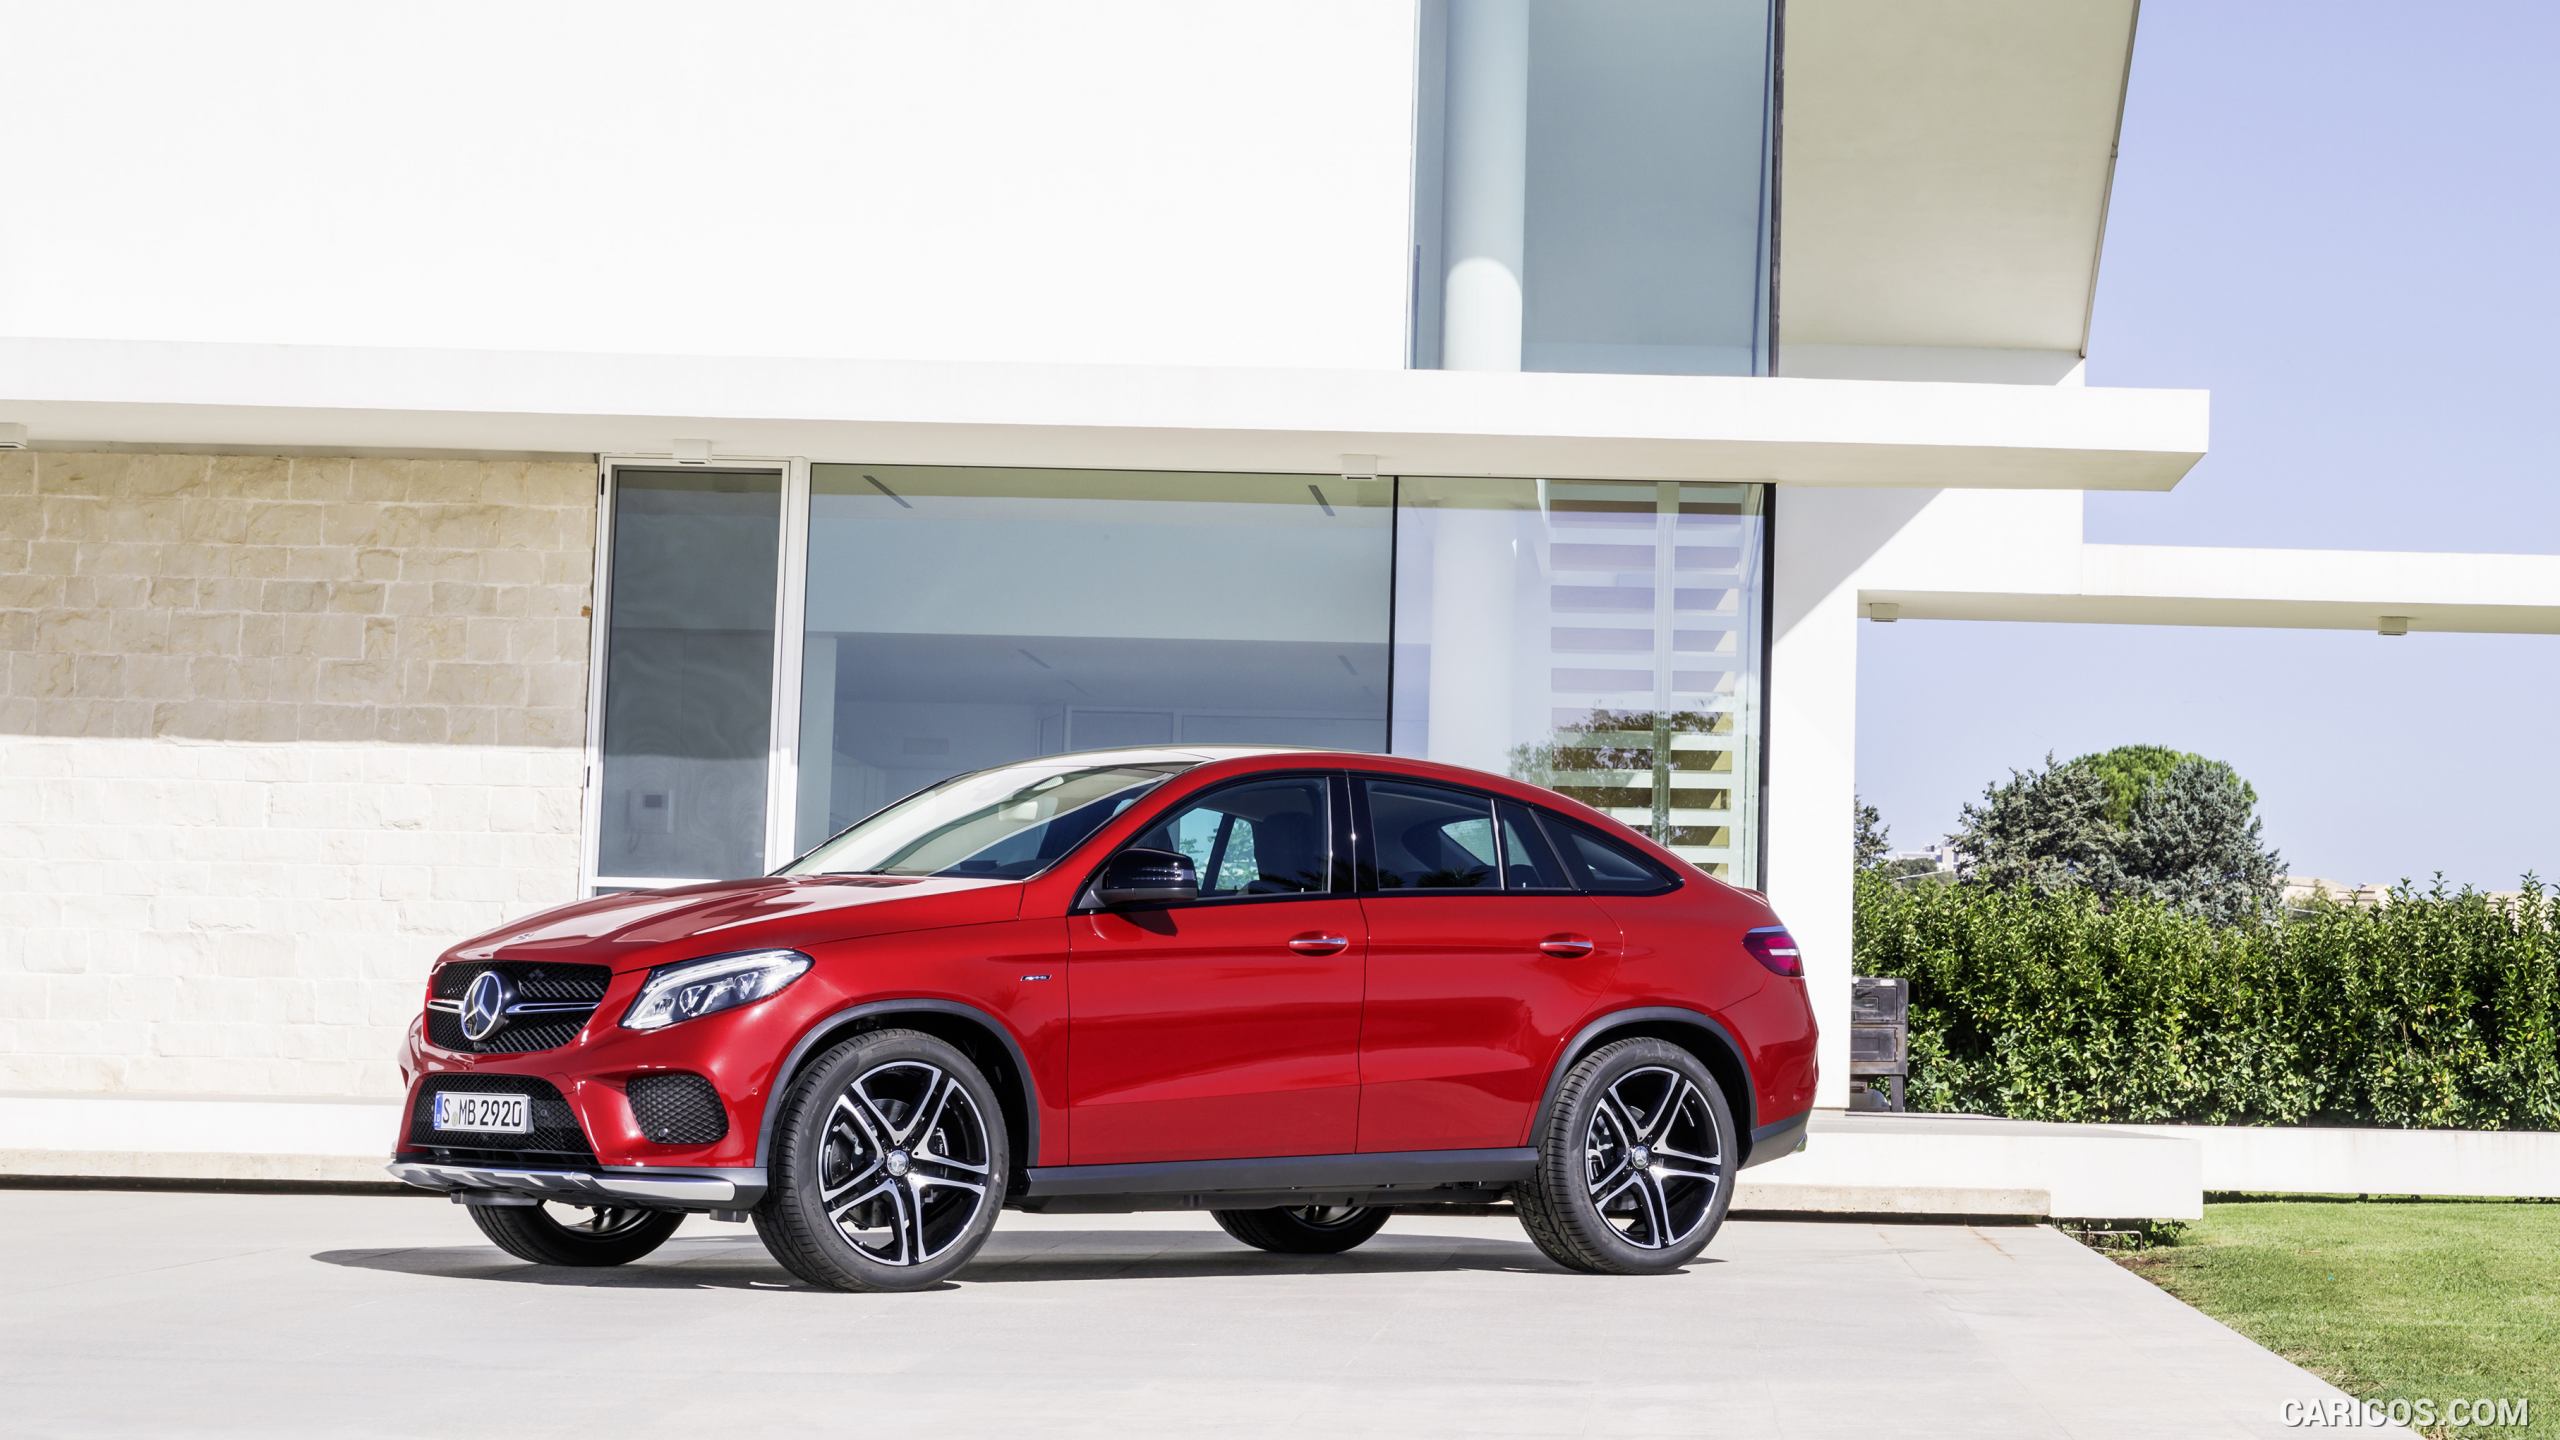 2016 Mercedes-Benz GLE 450 AMG Coupe 4MATIC (Designo Hyacinth Red Metallic) - Side, #4 of 115